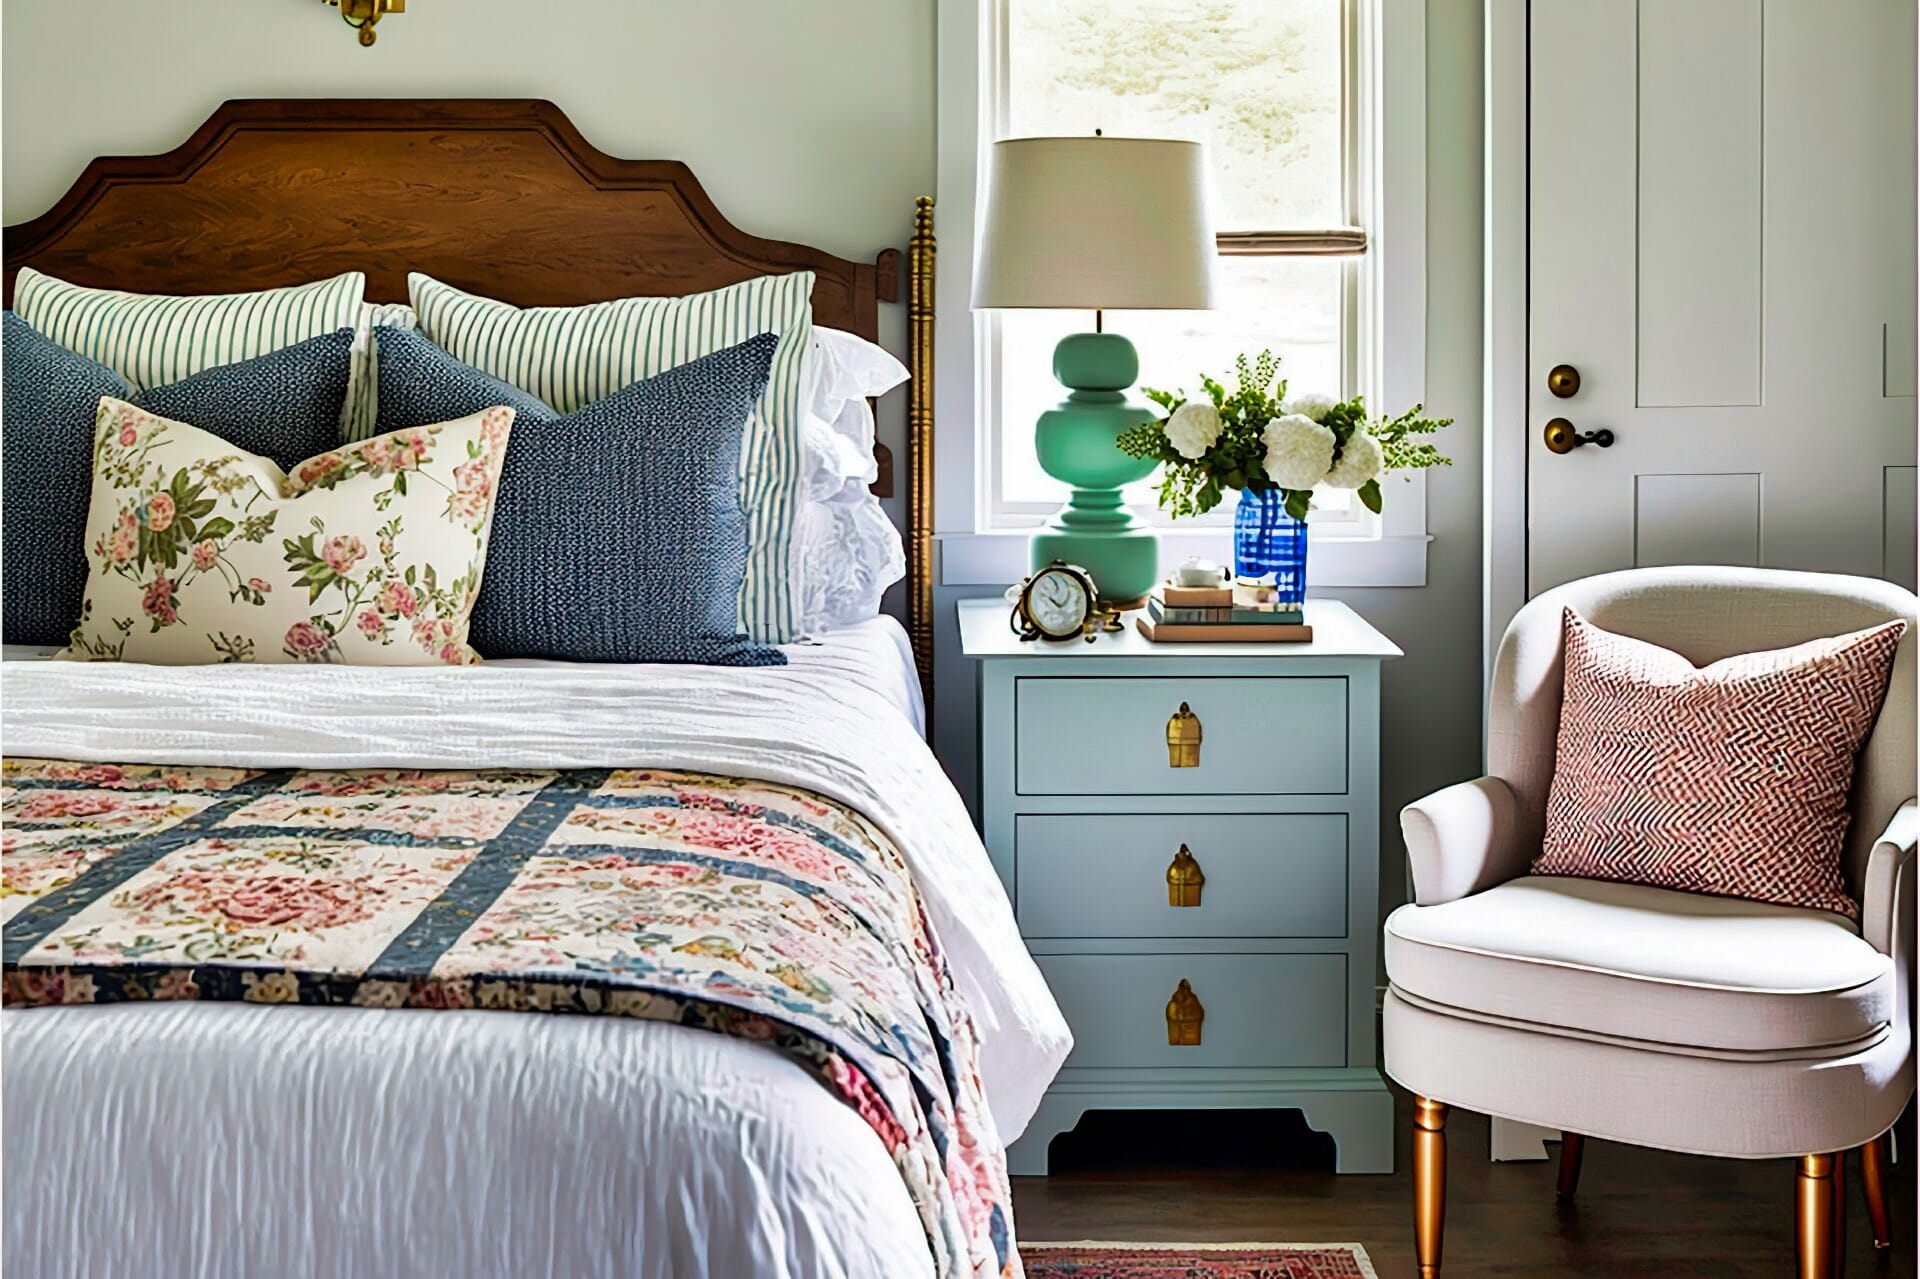 Cottage Style Bedroom With A Vintage And Eclectic Feel, Thanks To The Mix Of Antique And Modern Furnishings. A Queen Size Bed With A Simple White Headboard Is Dressed In A Cozy Bohemian Style Comforter, And A Collection Of Patterned Throw Pillows Add A Pop Of Color. A Vintage Nightstand With A Modern Brass Lamp Sits Beside The Bed, And A Mid-Century Modern Armchair In A Vibrant Fabric Provides A Unique Seating Option. A Woven Area Rug In Neutral Tones Anchors The Space, And A Collection Of Framed Vintage Posters Adds A Touch Of History.